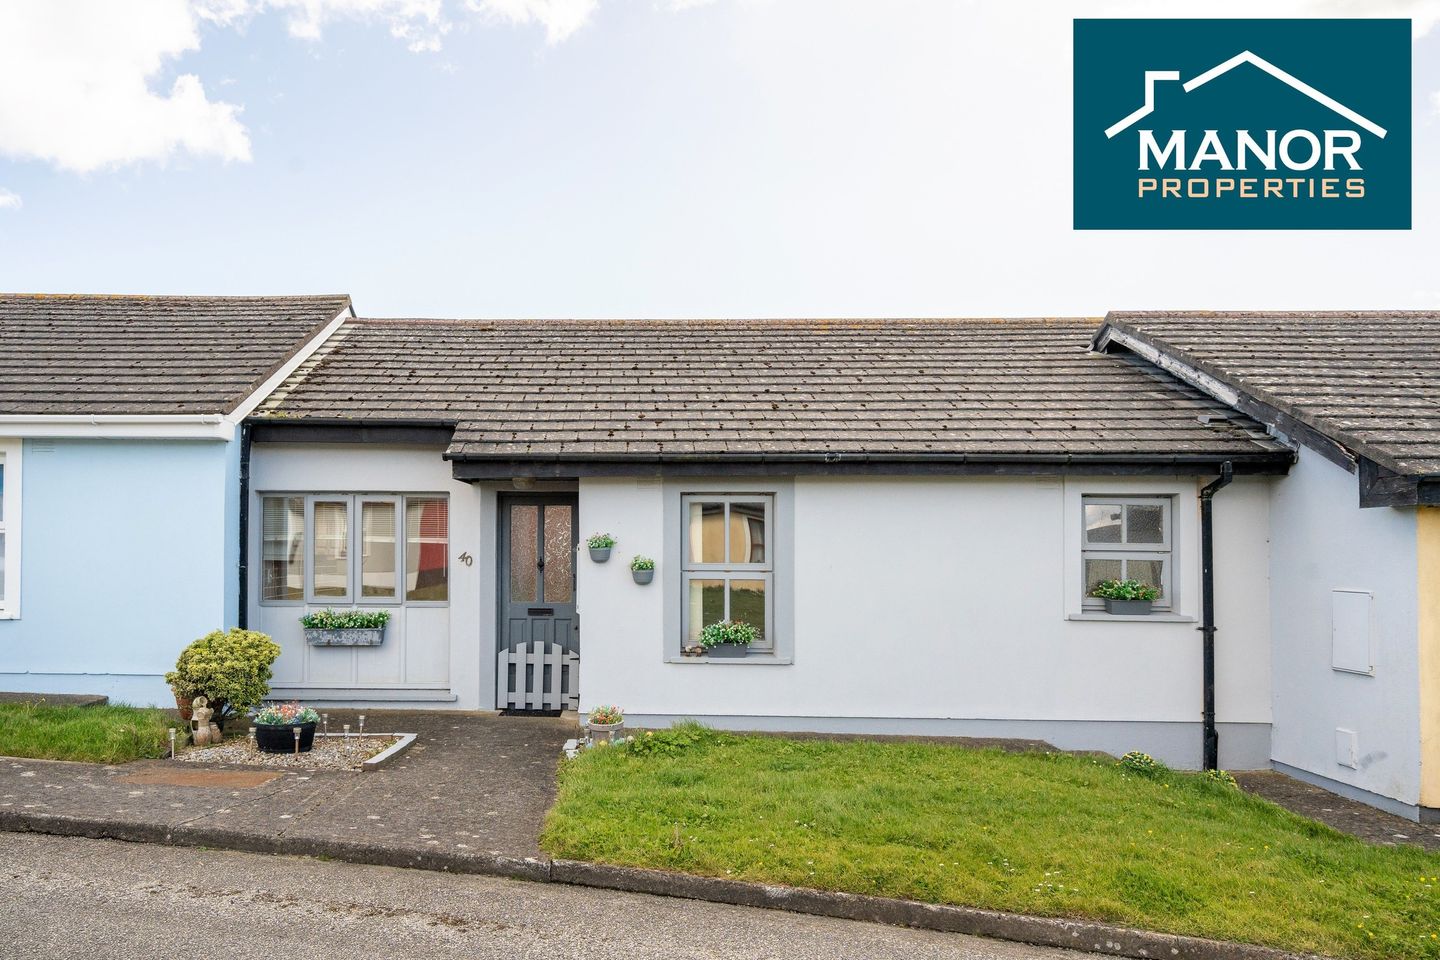 40 Pebble Grove, Pebble Beach, Tramore, Co. Waterford, X91T6R0